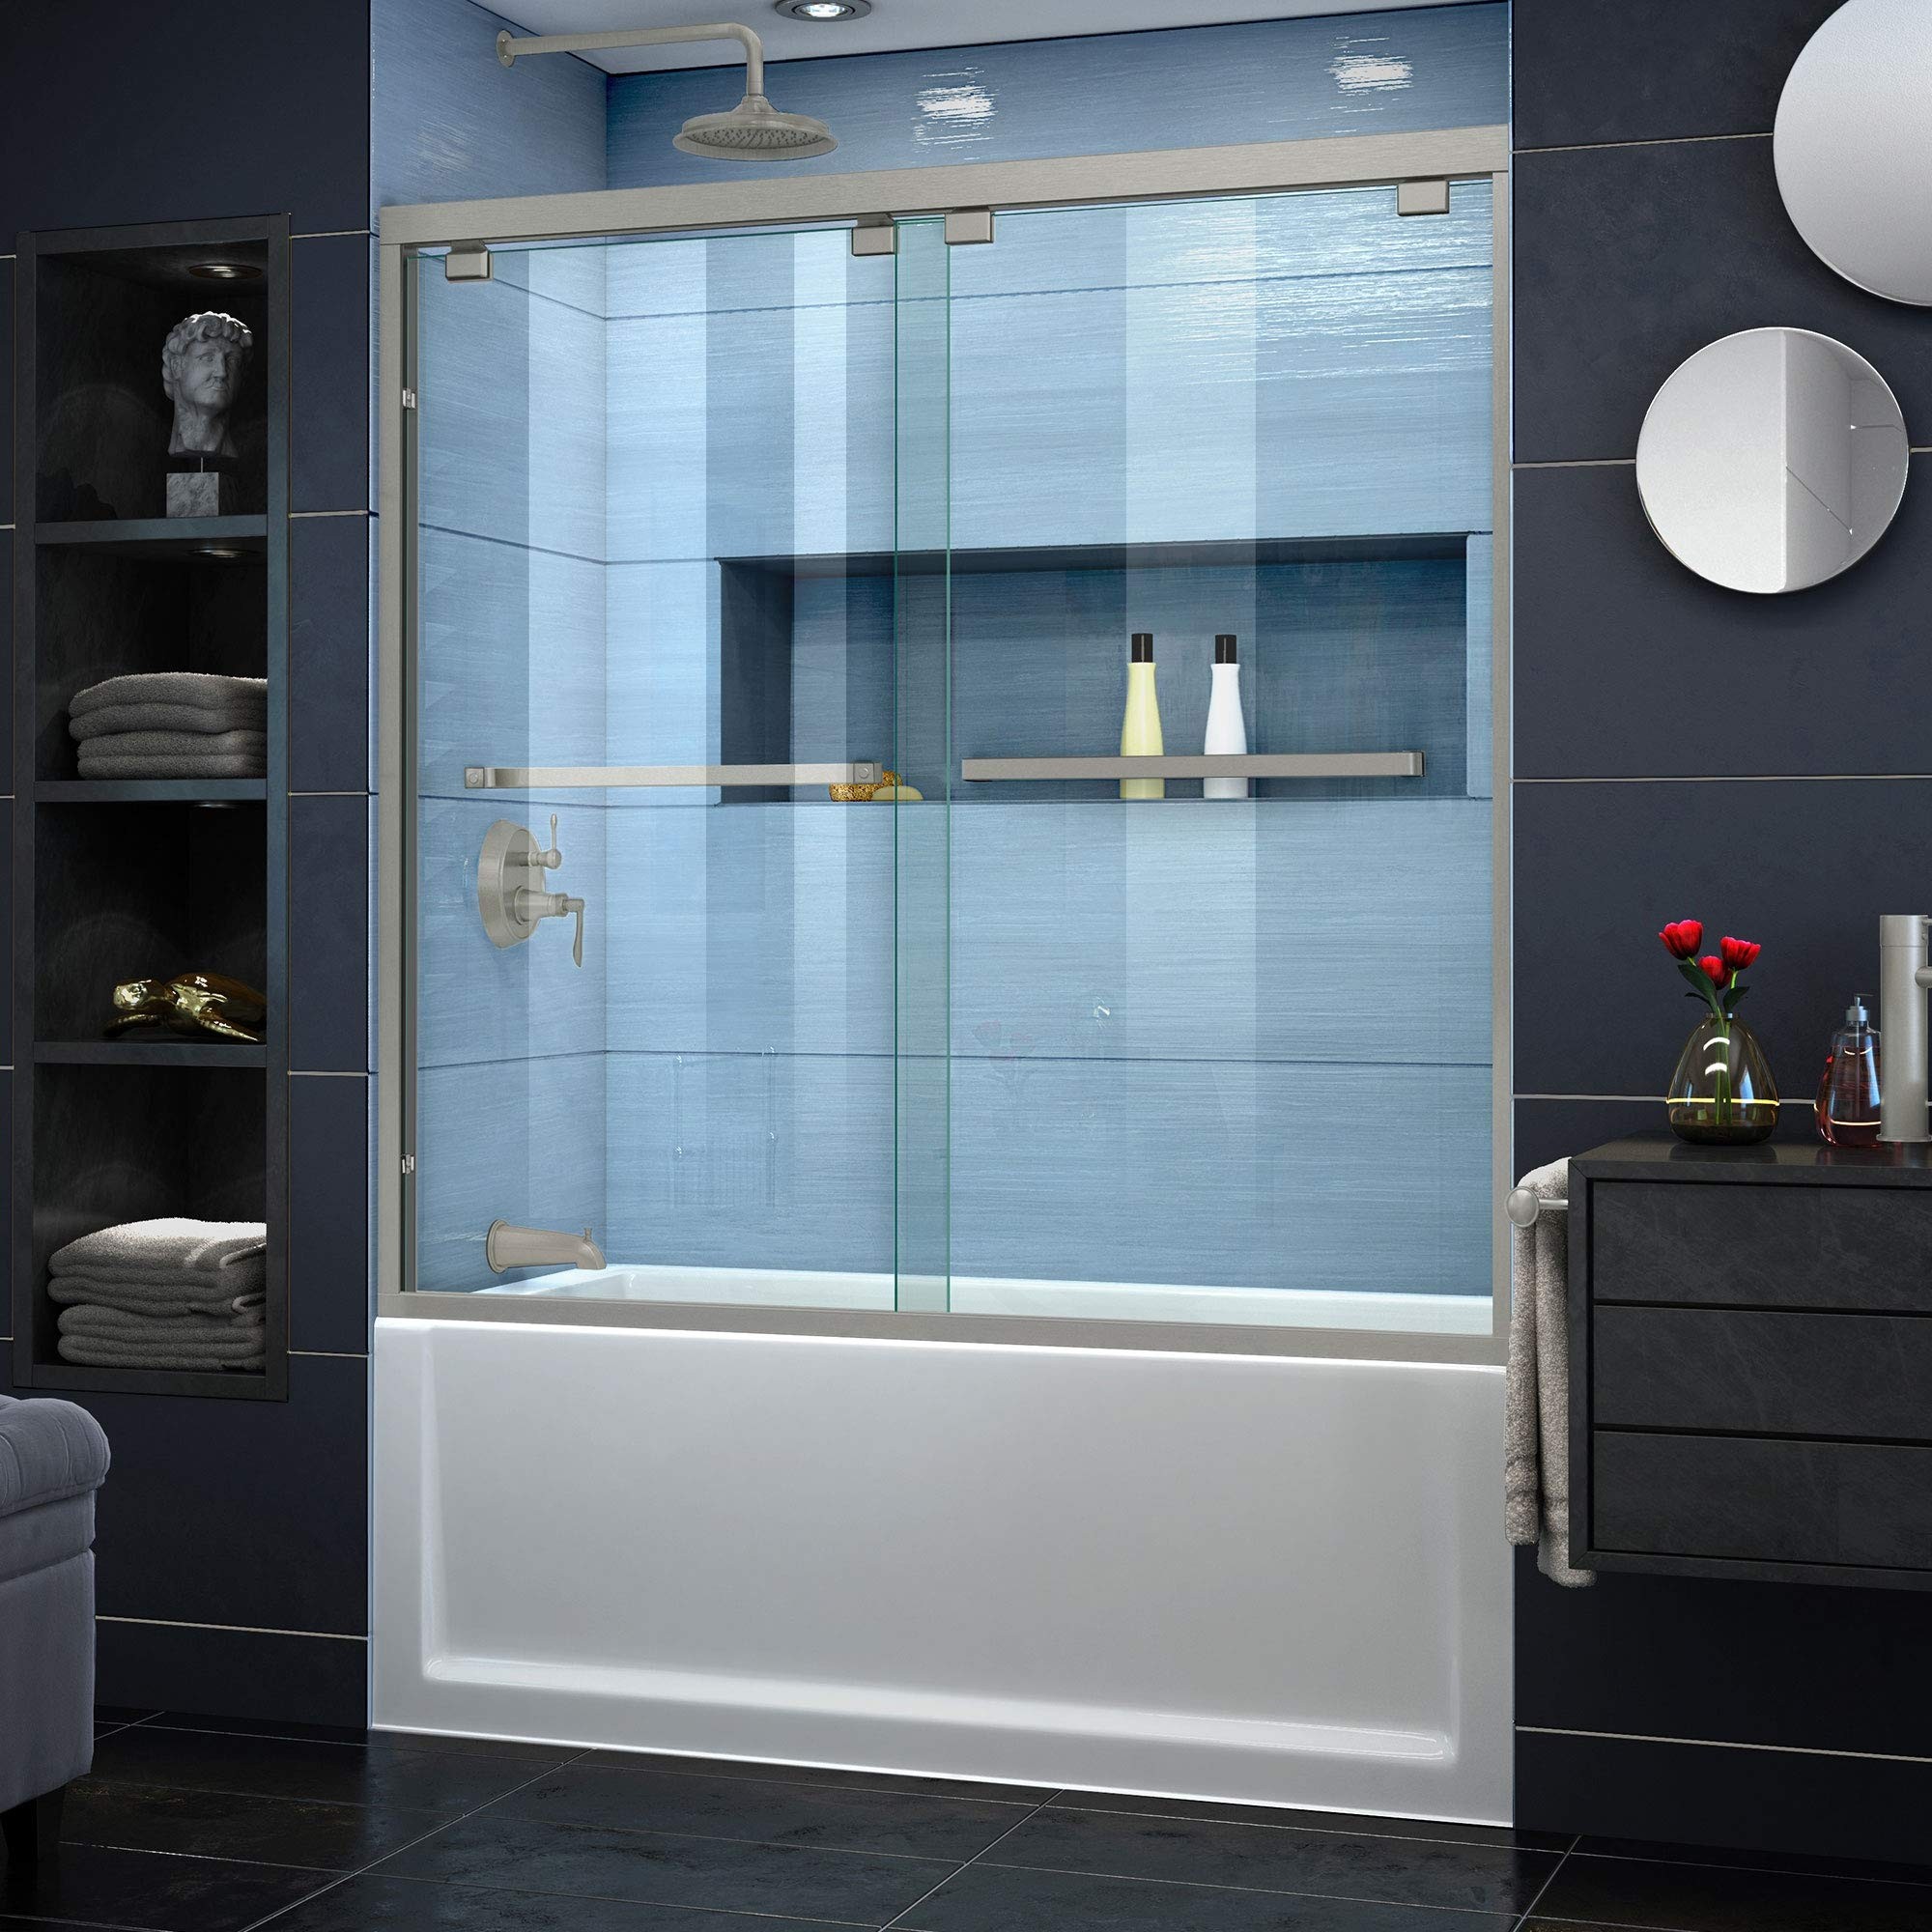 Encore 56" W x 58" H Bypass Semi-Frameless Tub Door with ClearMax Technology